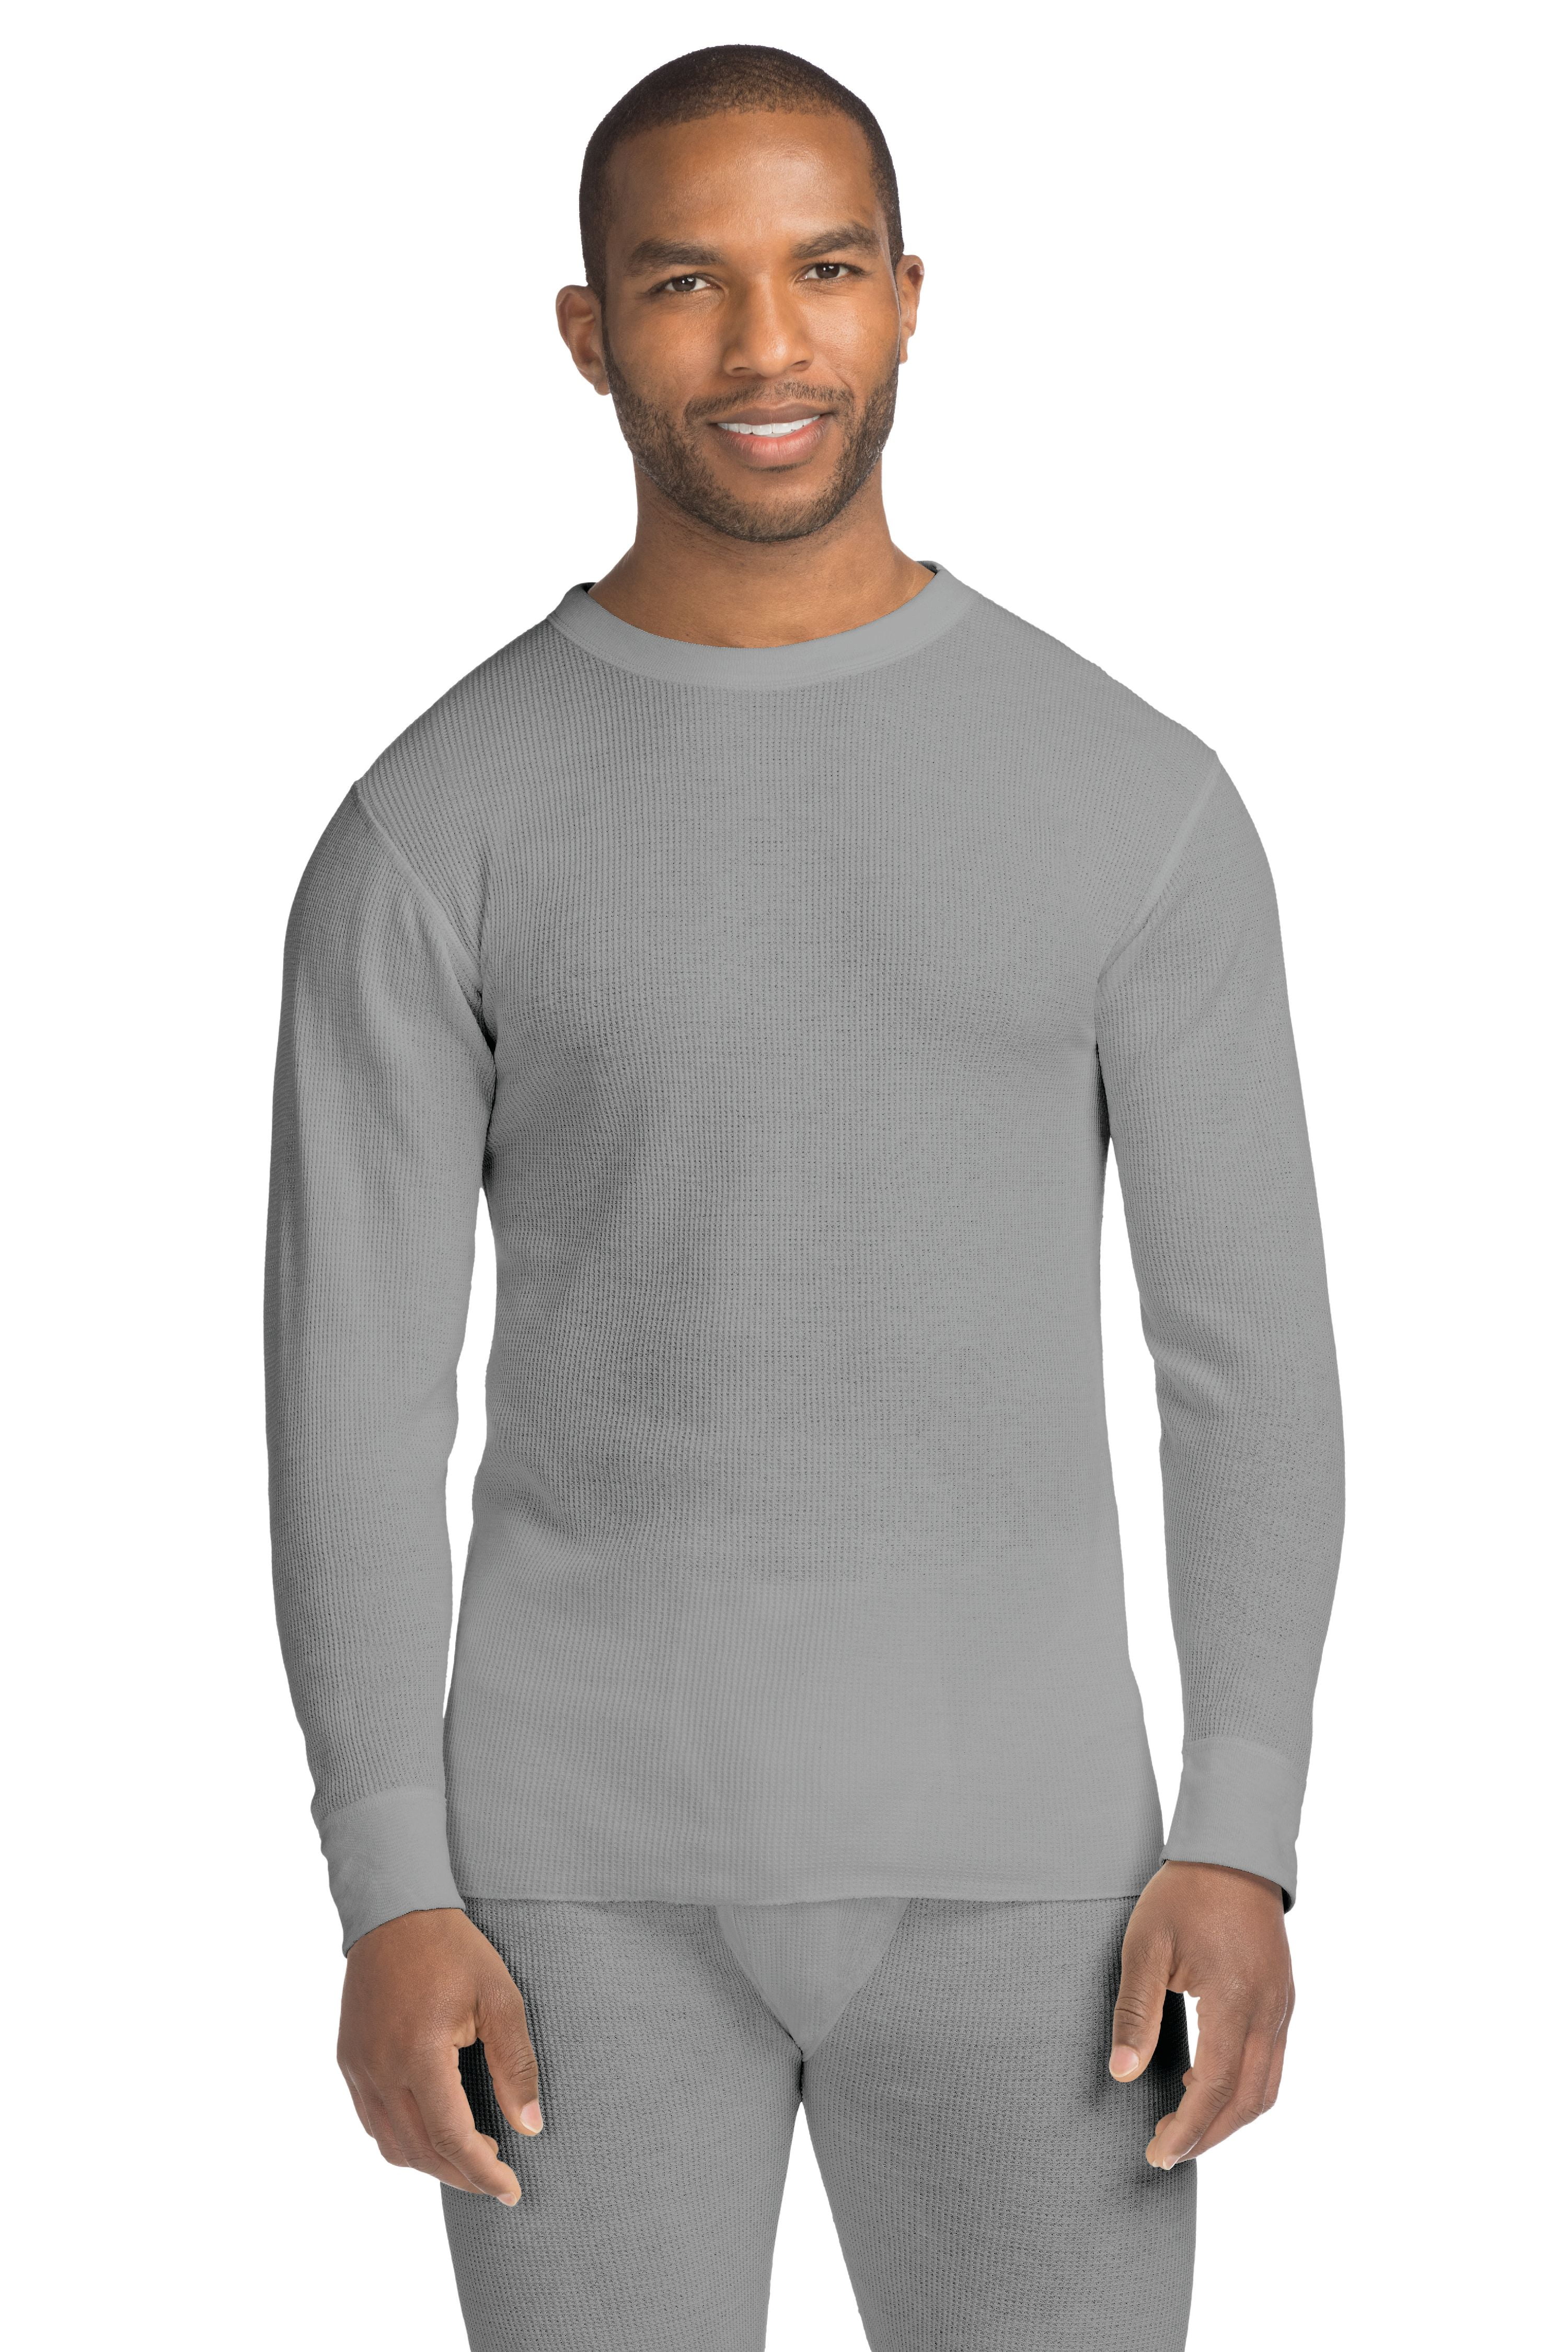 New Hanes Men's X Temp Waffle Knit Crew Neck Thermal Top color and sizes 